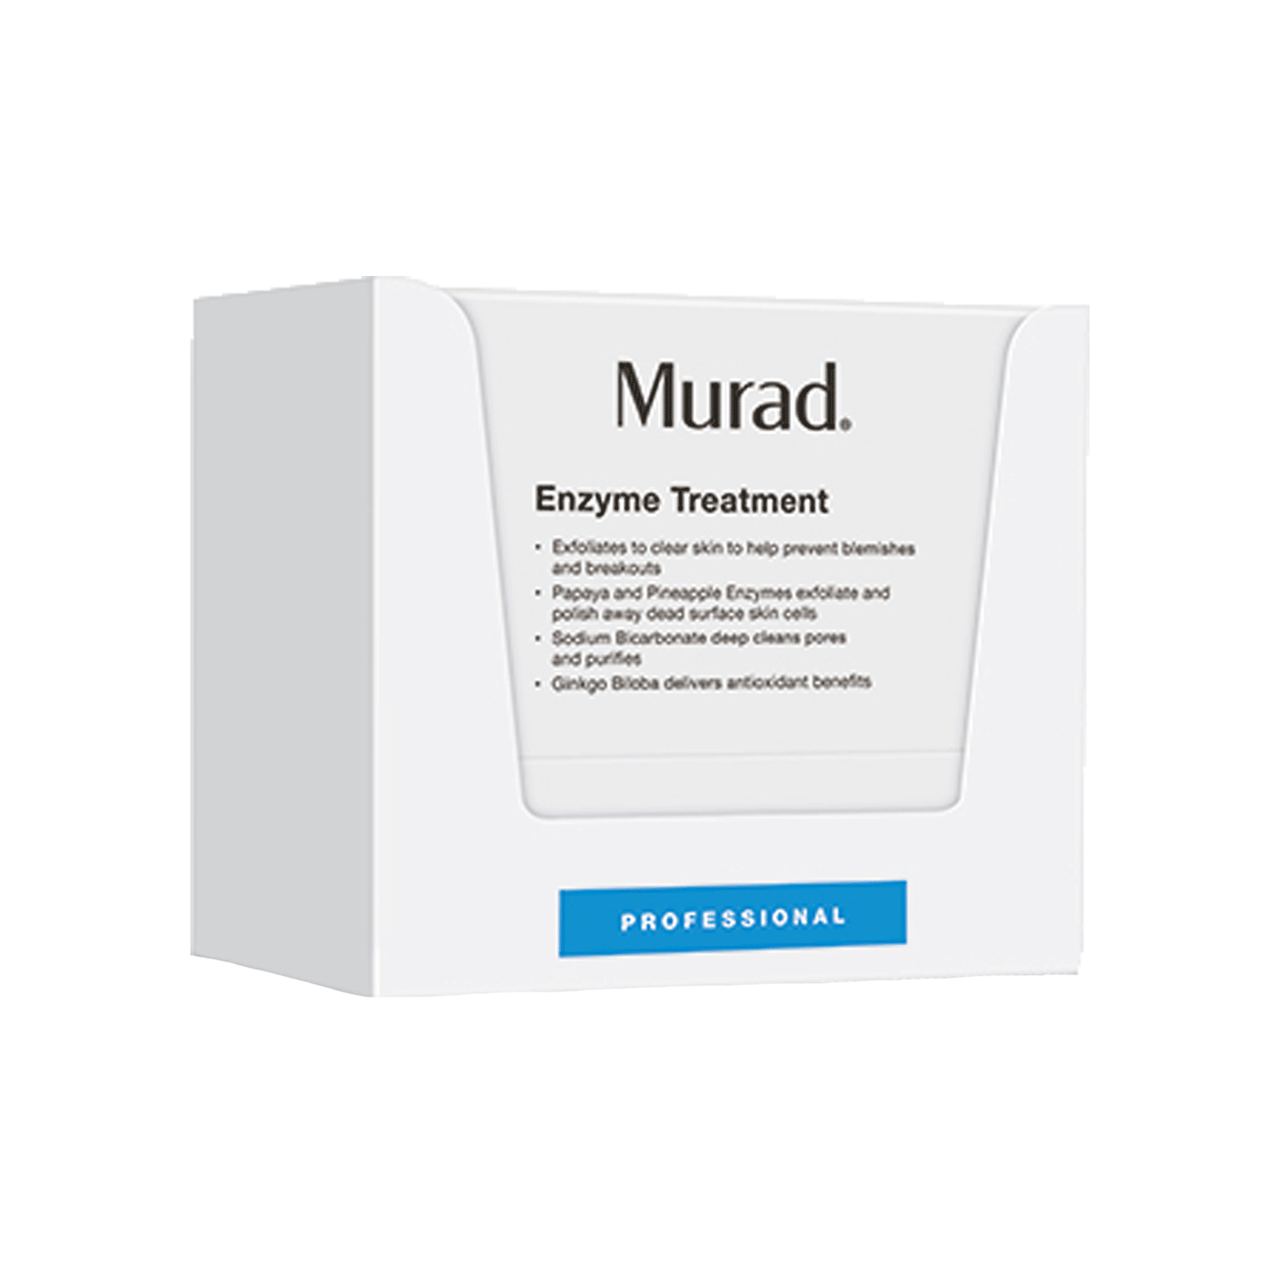 Primary image for Murad Enzyme Treatment - 25 Piece Pack